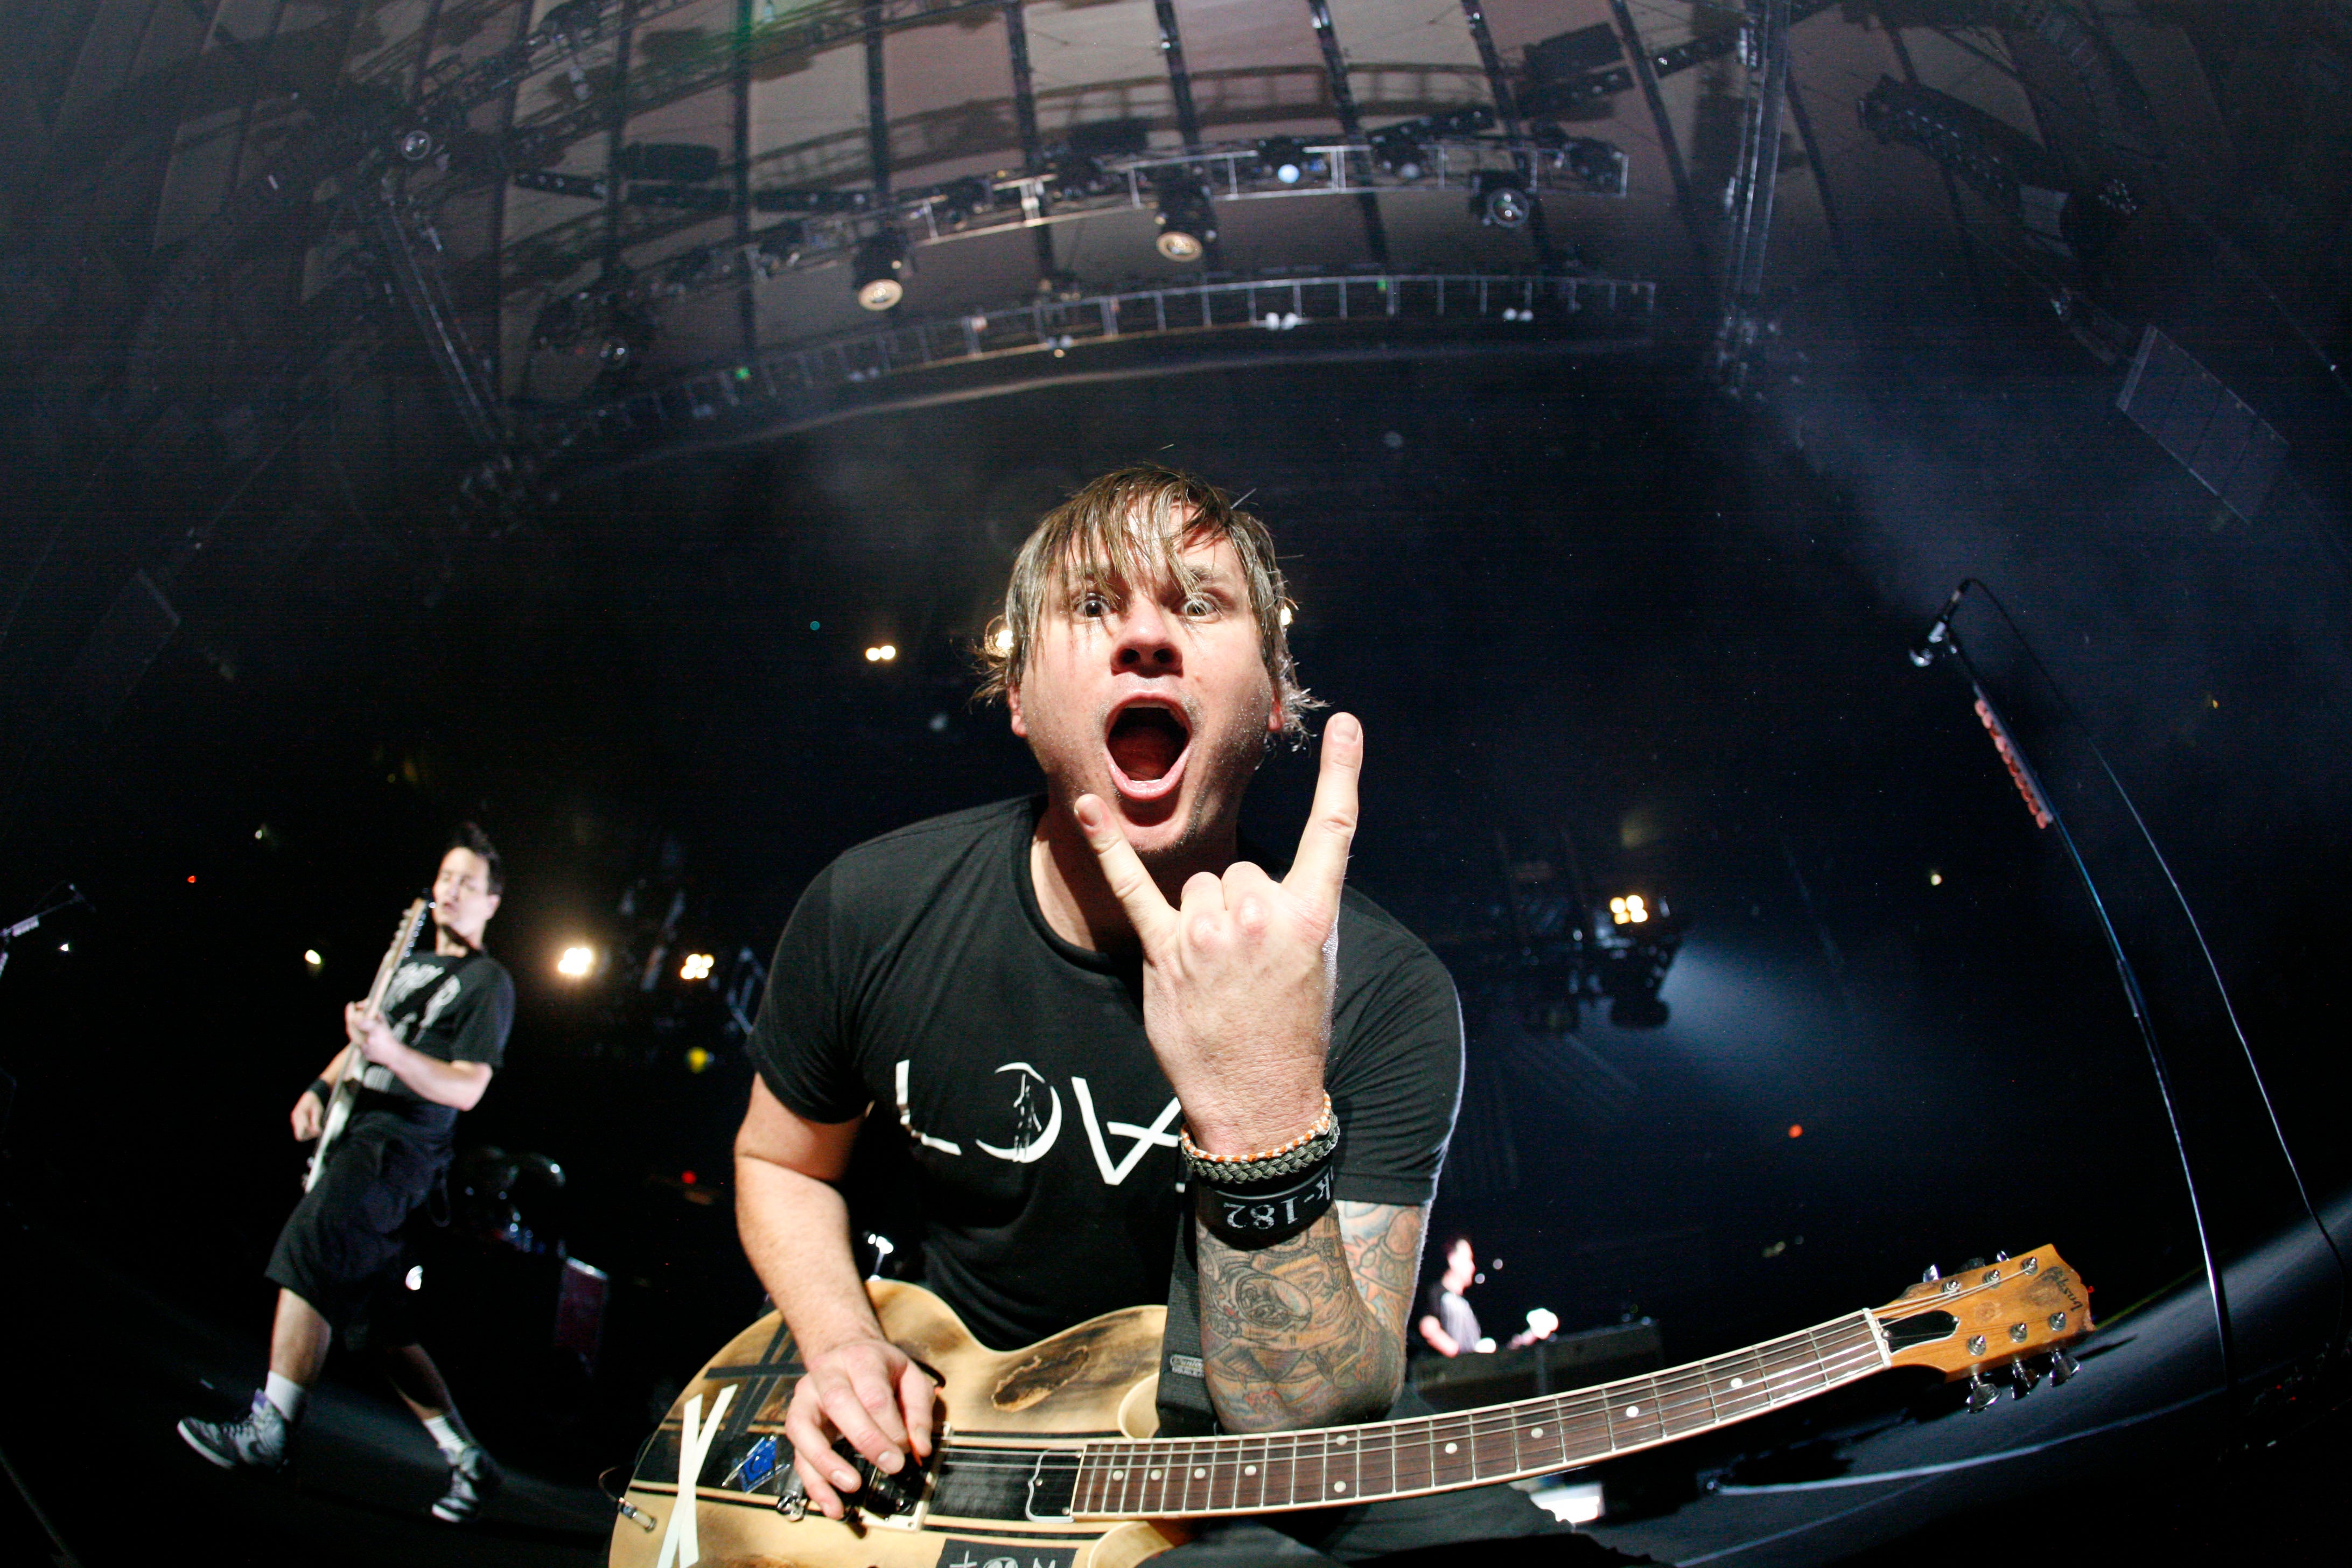 Blink-182’s Tom DeLonge has become a leading voice in the arena of extraterrestrial exploration